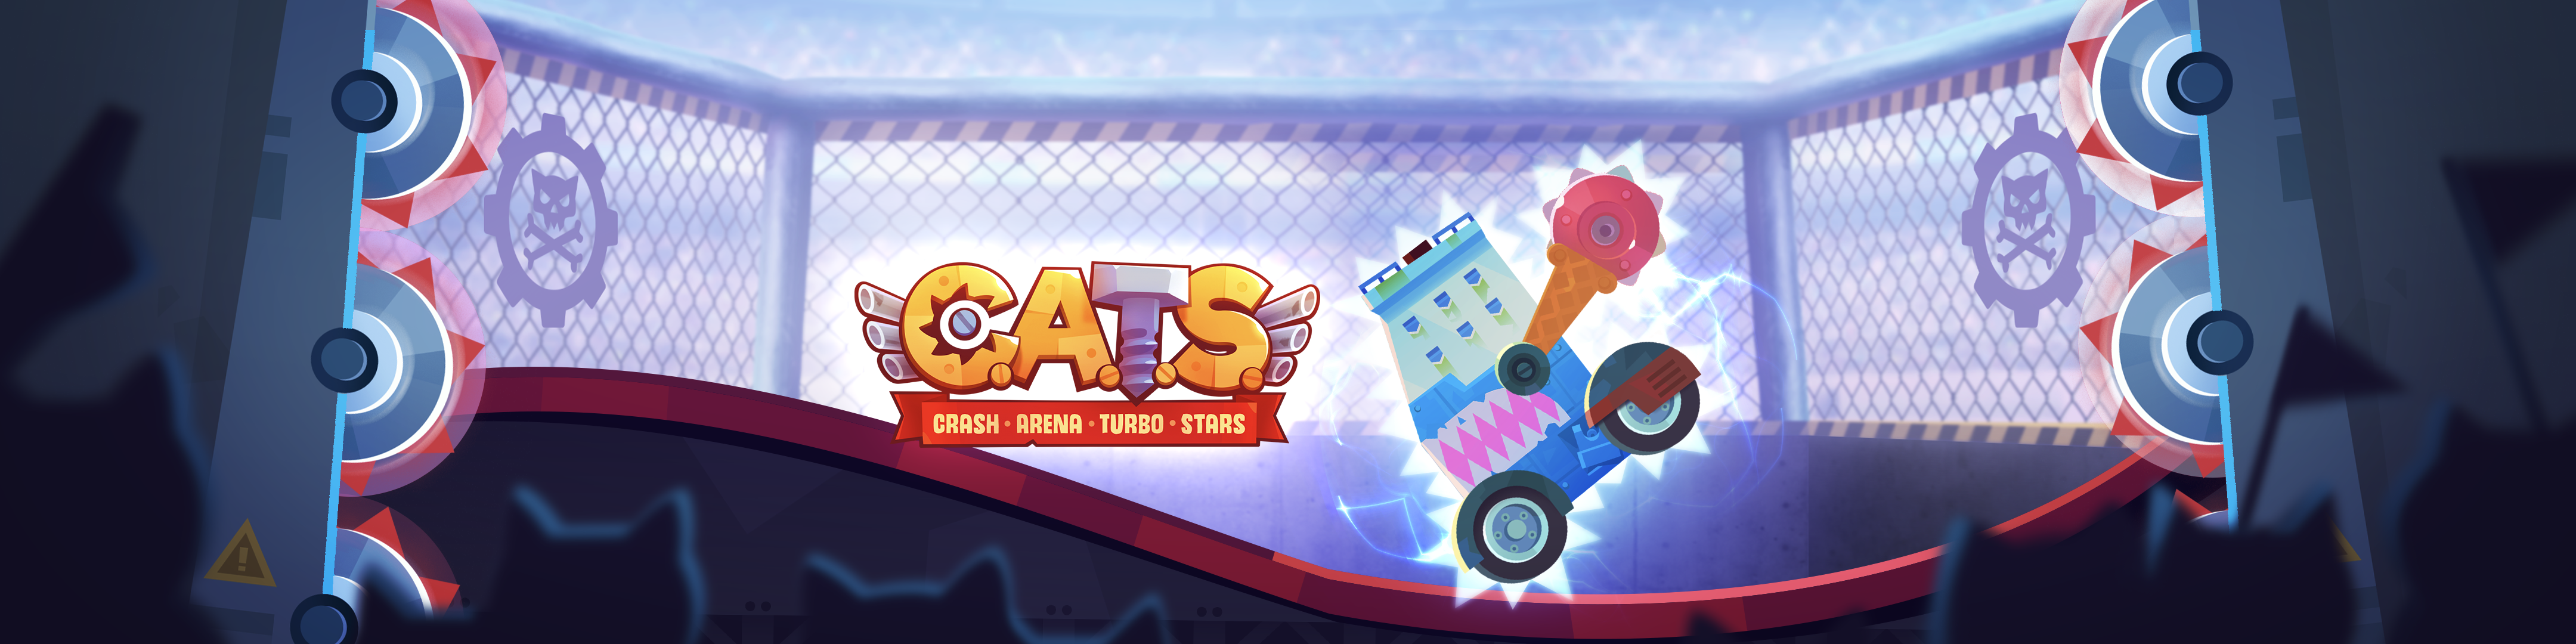 how long does cats crash arena turbo stars load